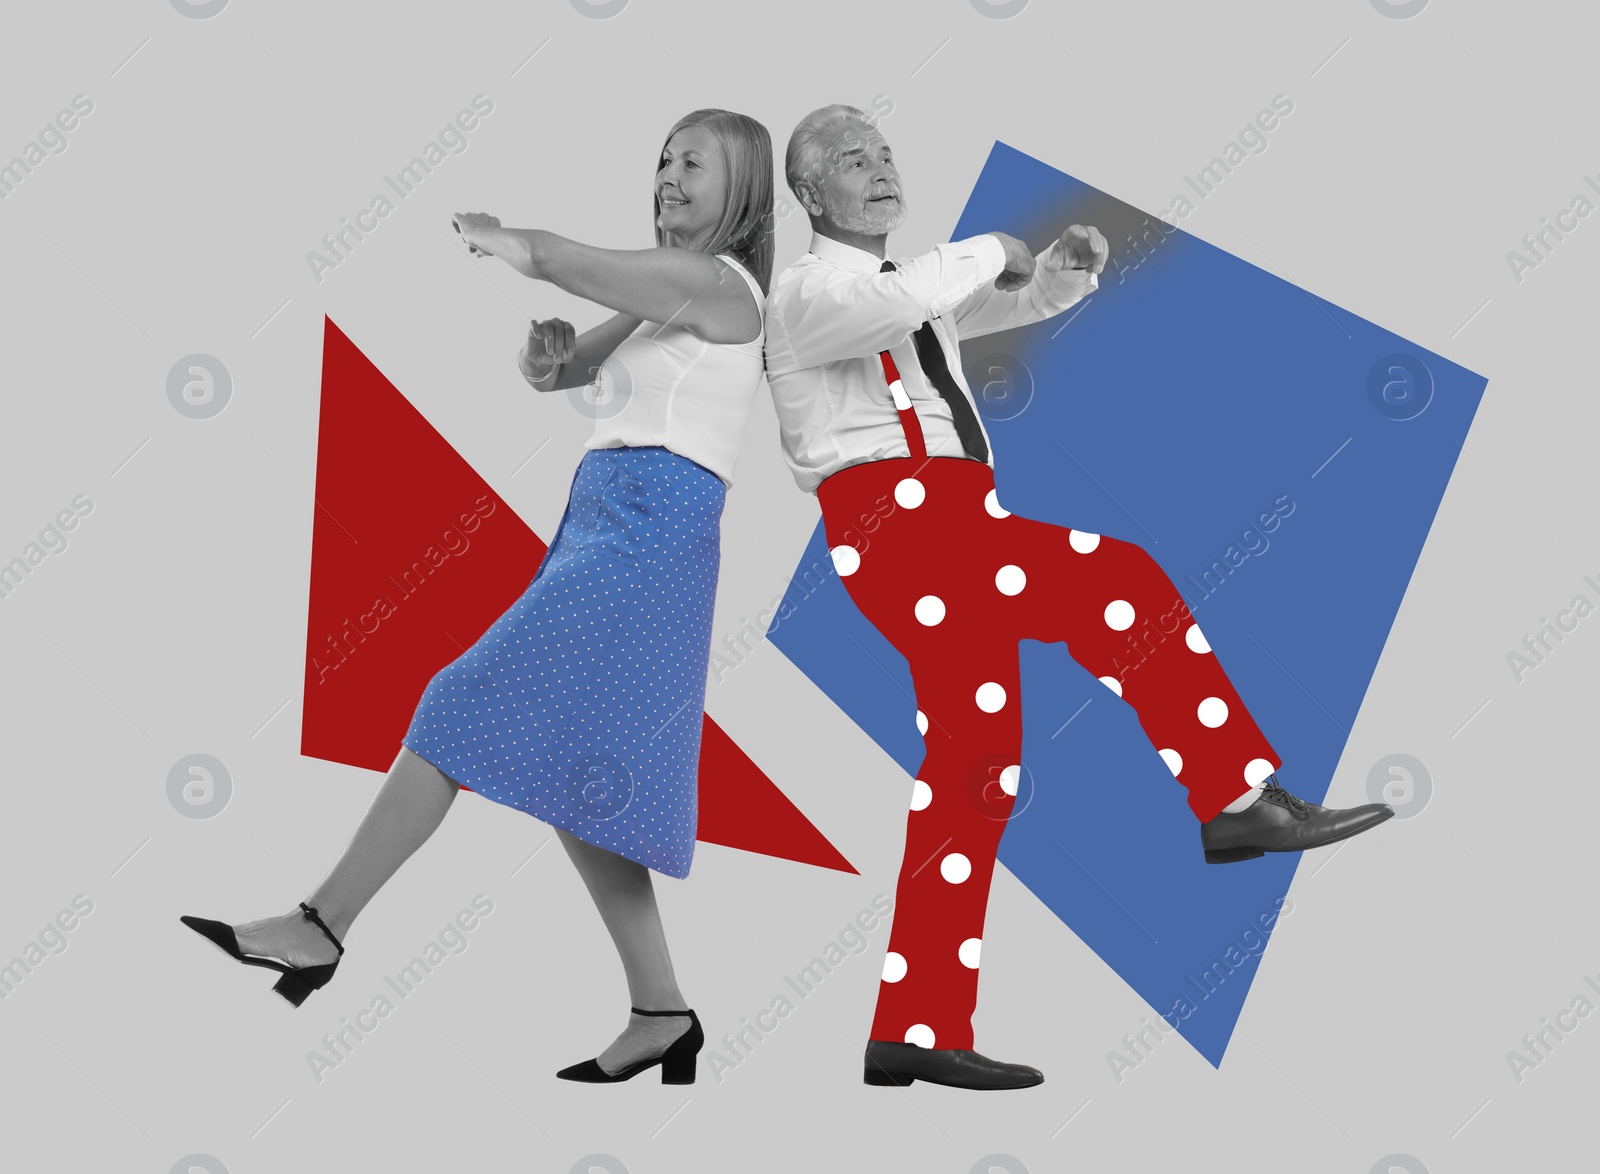 Image of Happy couple dancing on bright background. Creative collage with stylish mature man and woman. Concept of music, energy, party, fashion, lifestyle